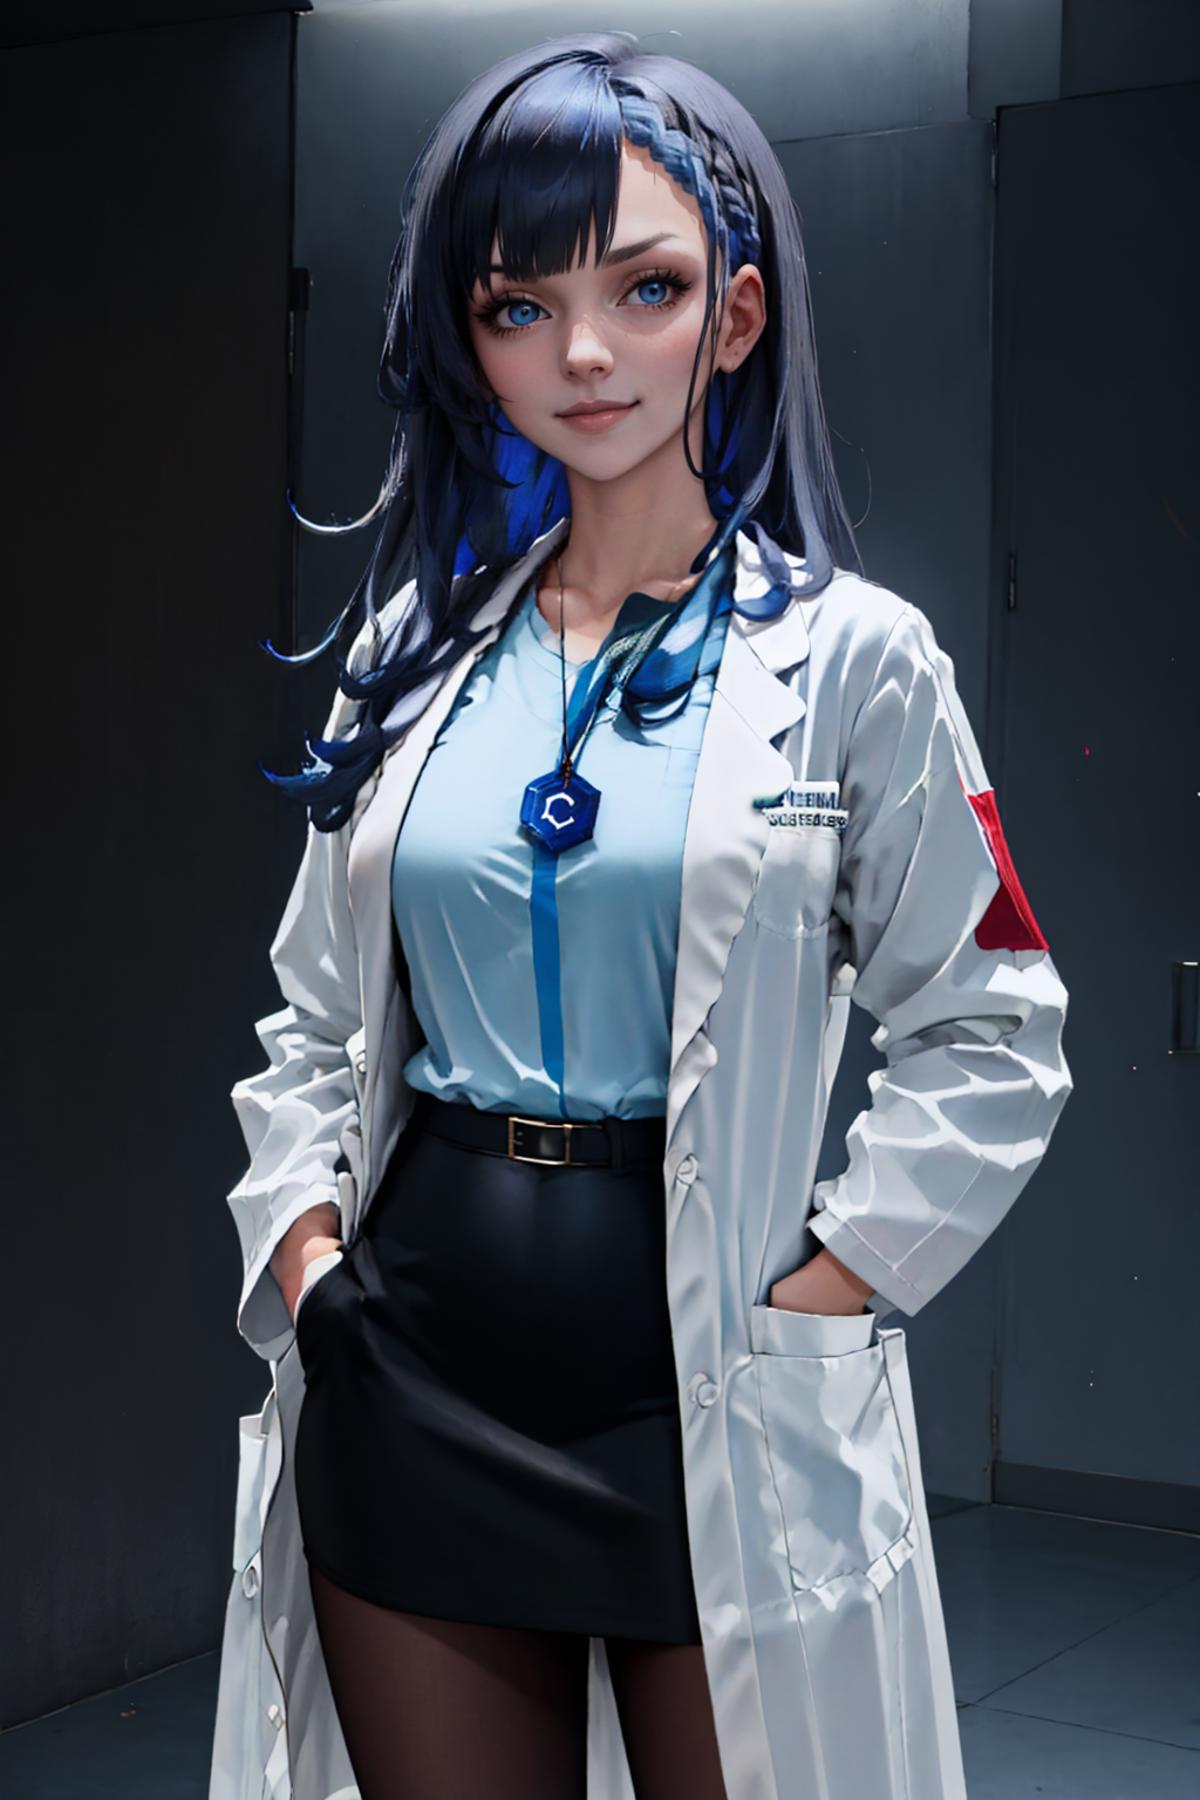 Anime-style female character dressed in a medical coat and skirt.